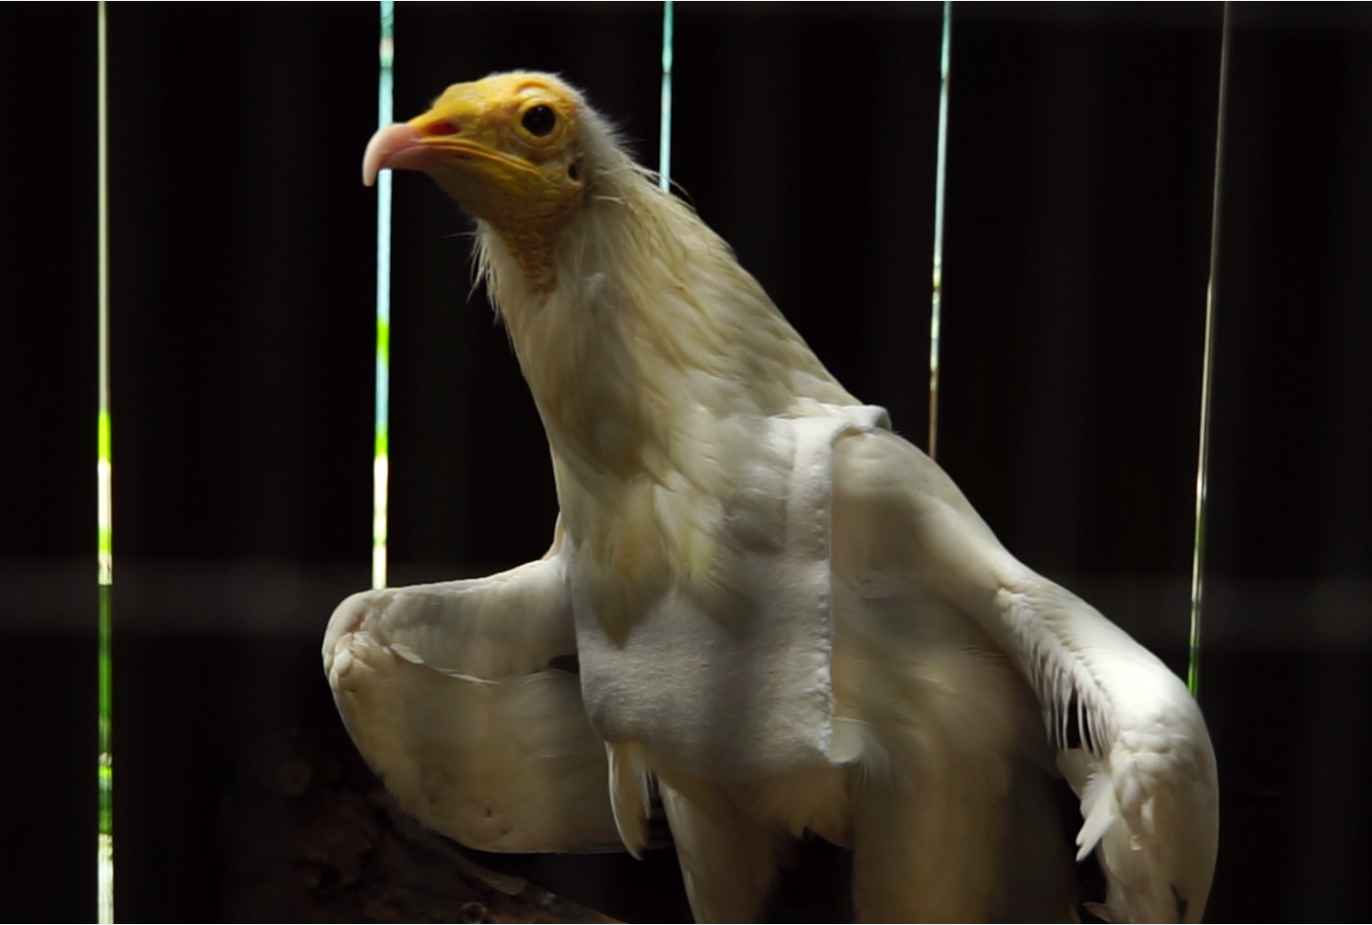 Rod, an Egyptian Vulture, is Jurong Bird Park’s oldest bird. Once a mainstay of the park’s Kings of the Skies presentation, he has since retired and currently resides in the Retirement Aviary outside the Hawk Arena. Credit: Jurong Bird Park